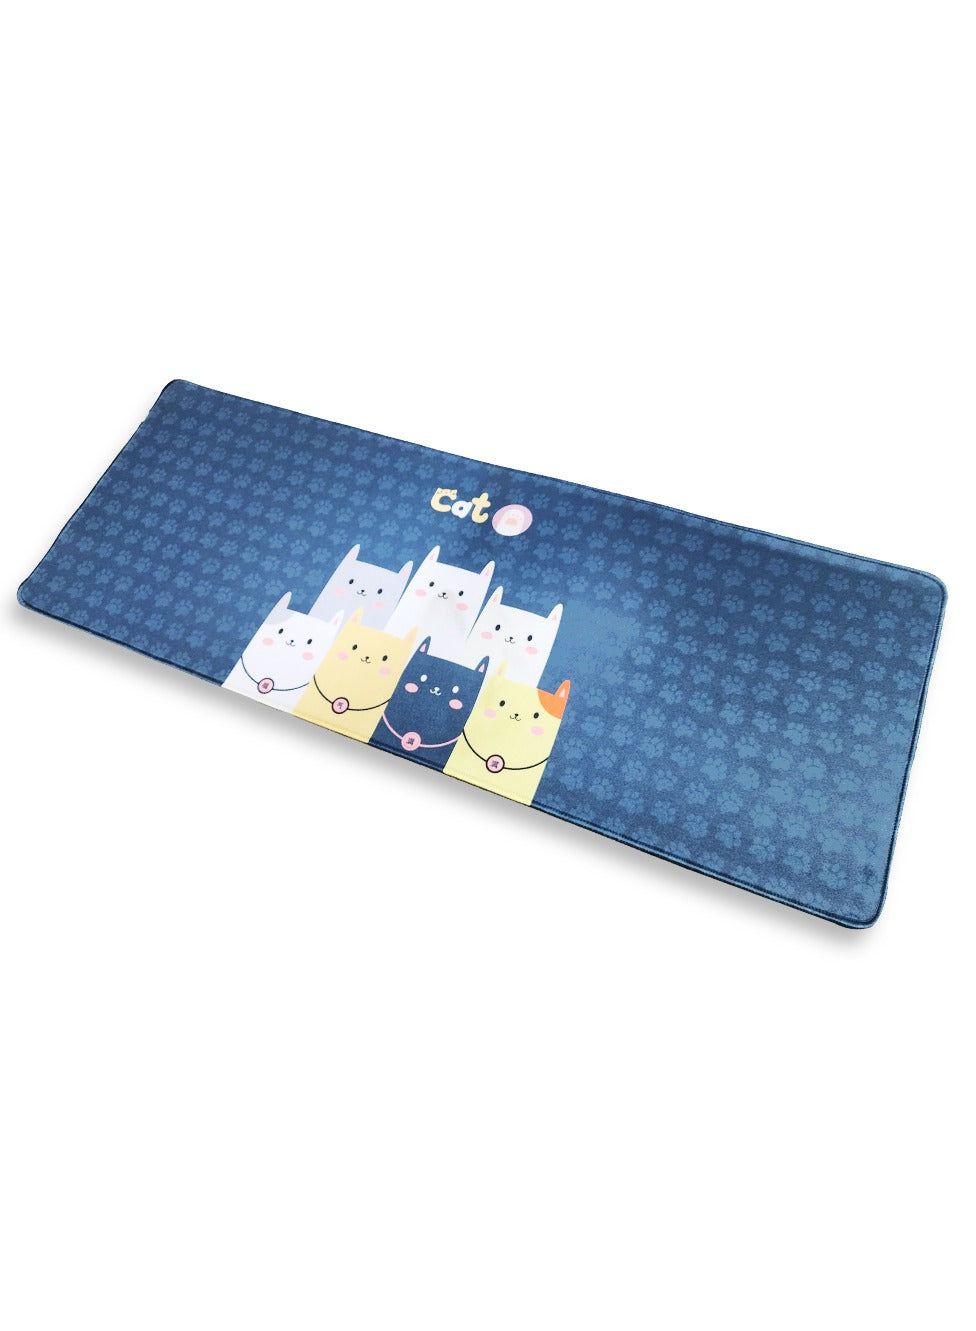 Gaming Mouse Pad -Colour Designs- Size 80X30 CM - Stitched Edges Anti-slip rubber base - Optimized for all mouse sensitivities and sensors - Model Mix Pads KK1